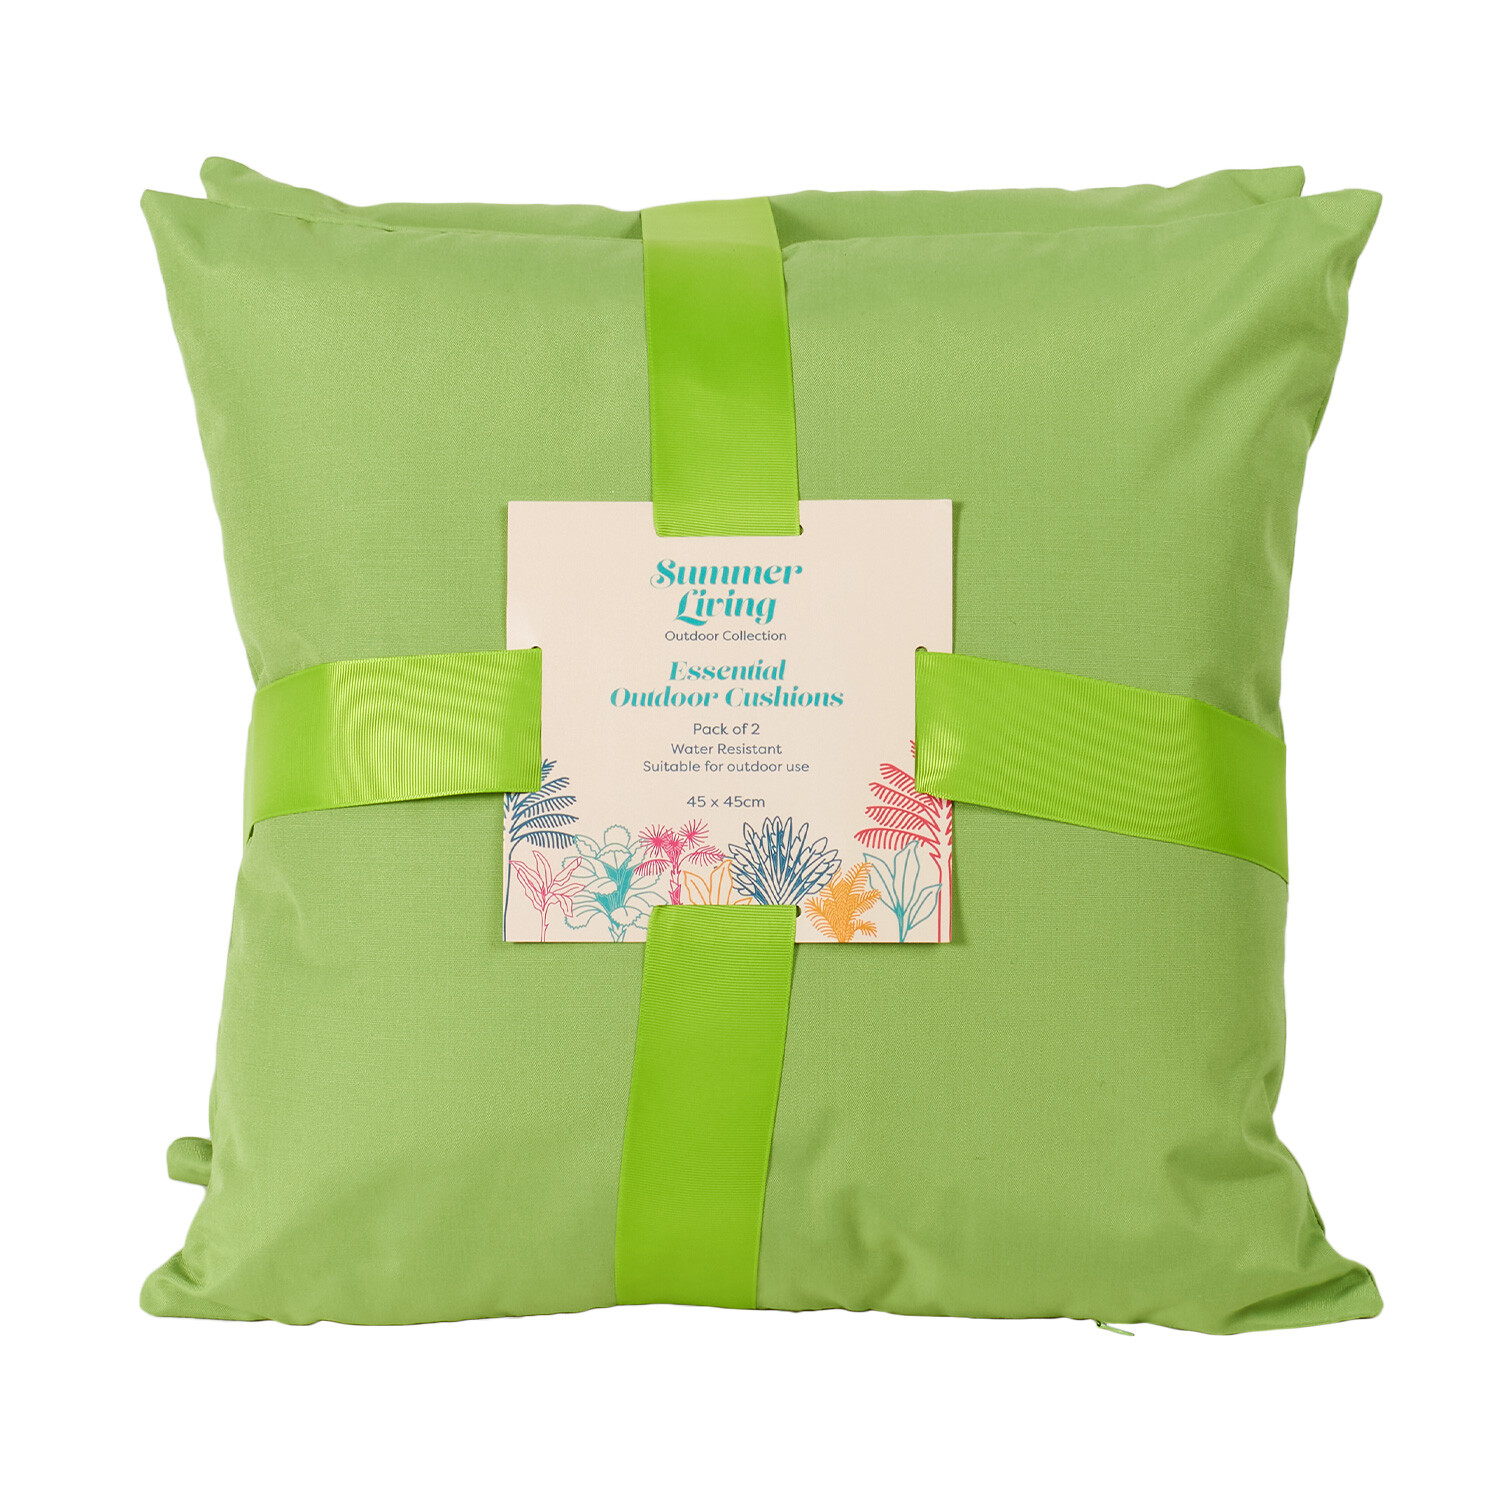 Essential Outdoor Cushions - Green Image 1